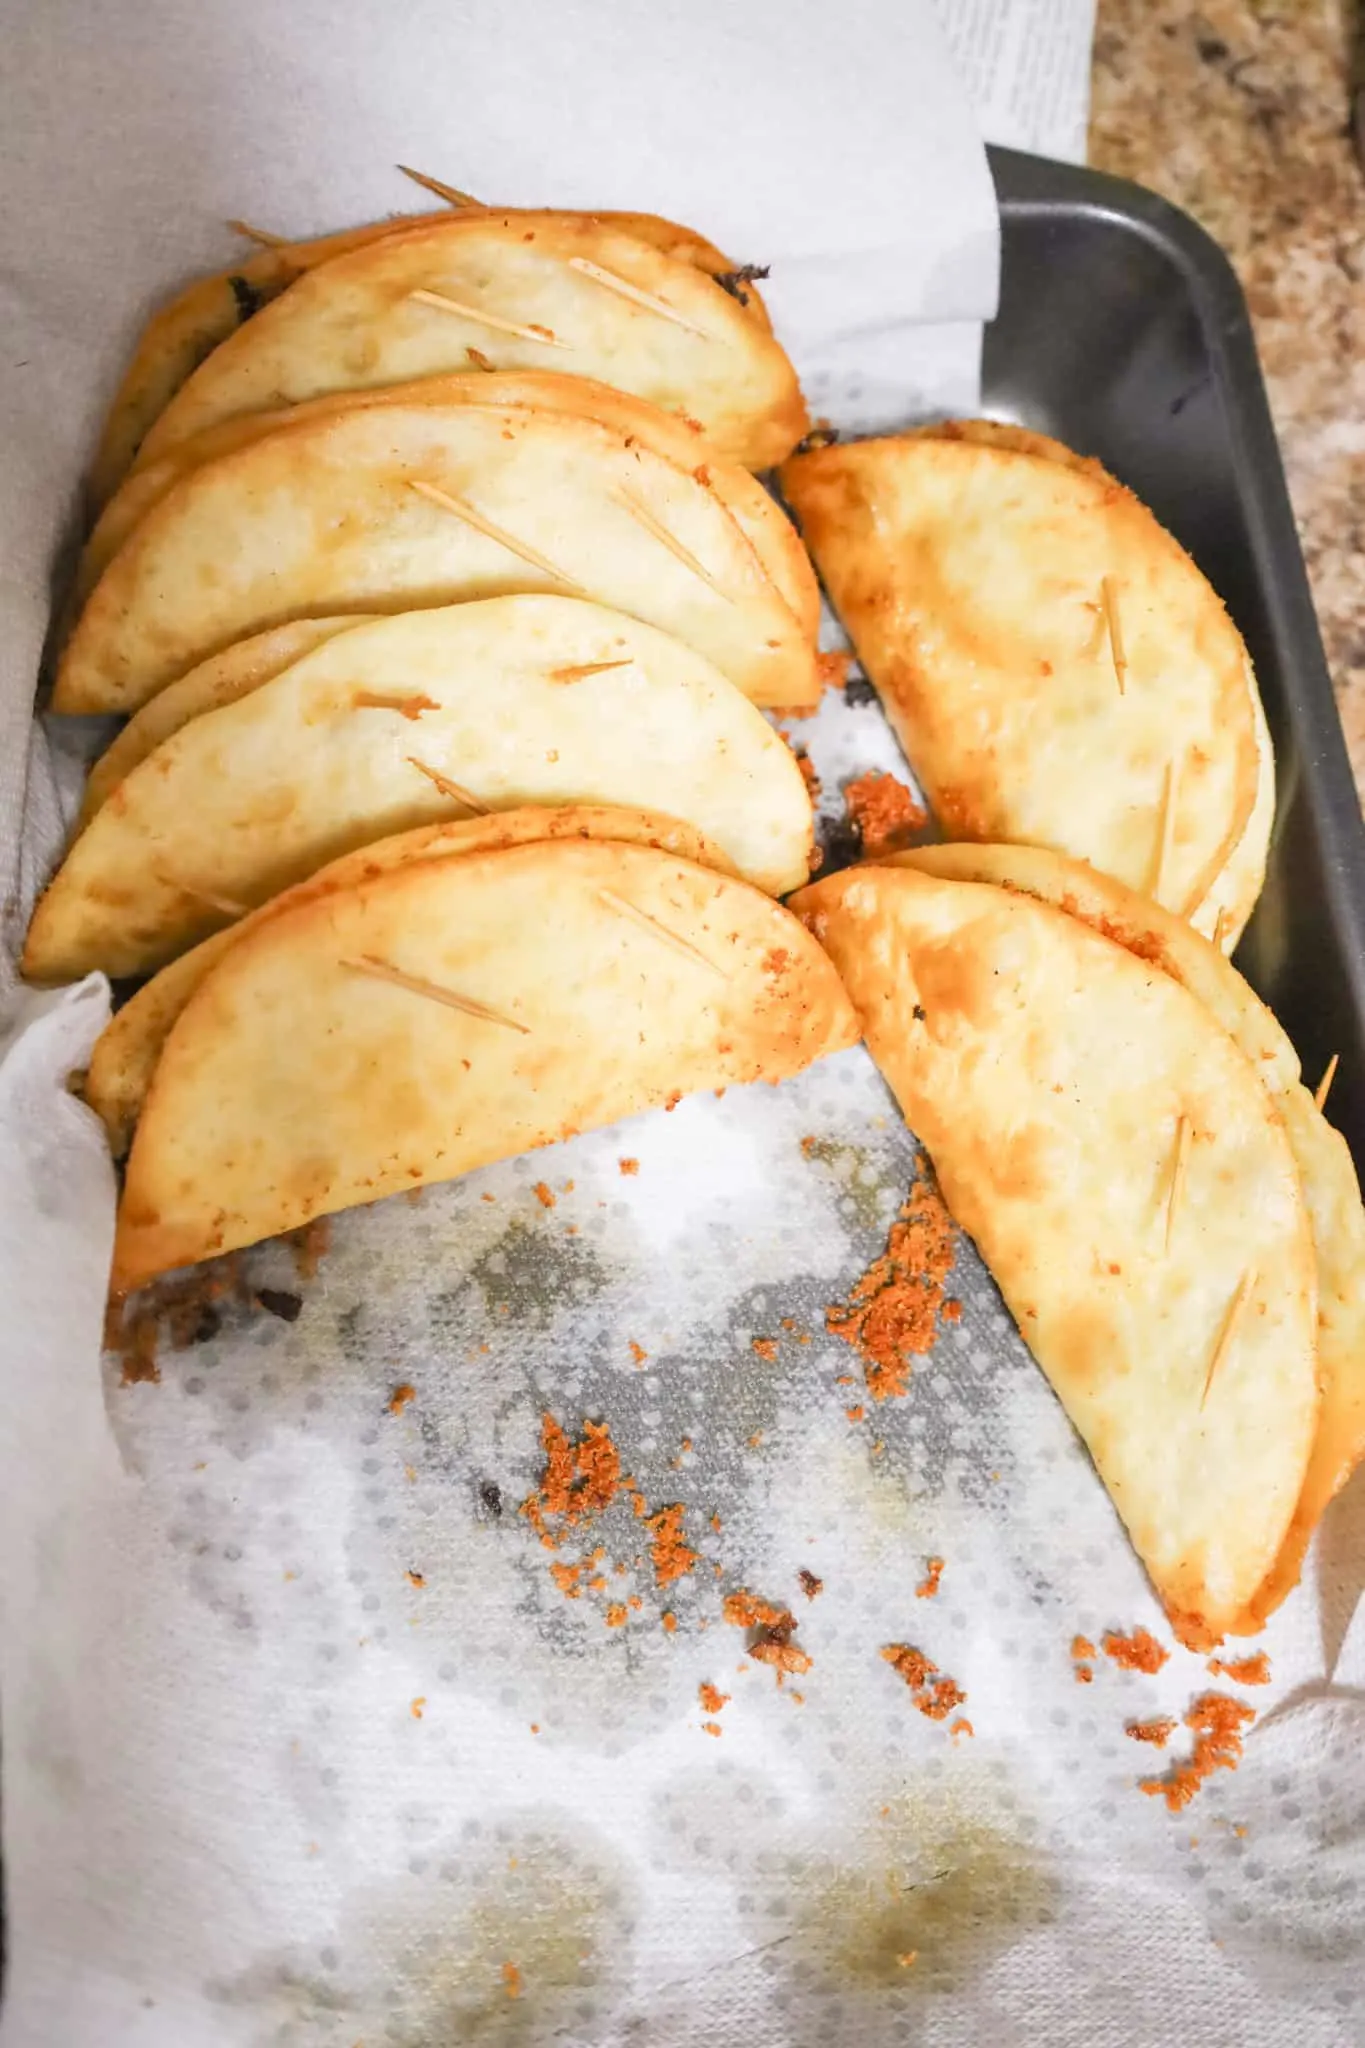 Fried Tacos are an easy ground beef dinner recipe using flour tortillas filled with taco beef and shredded cheese before frying.